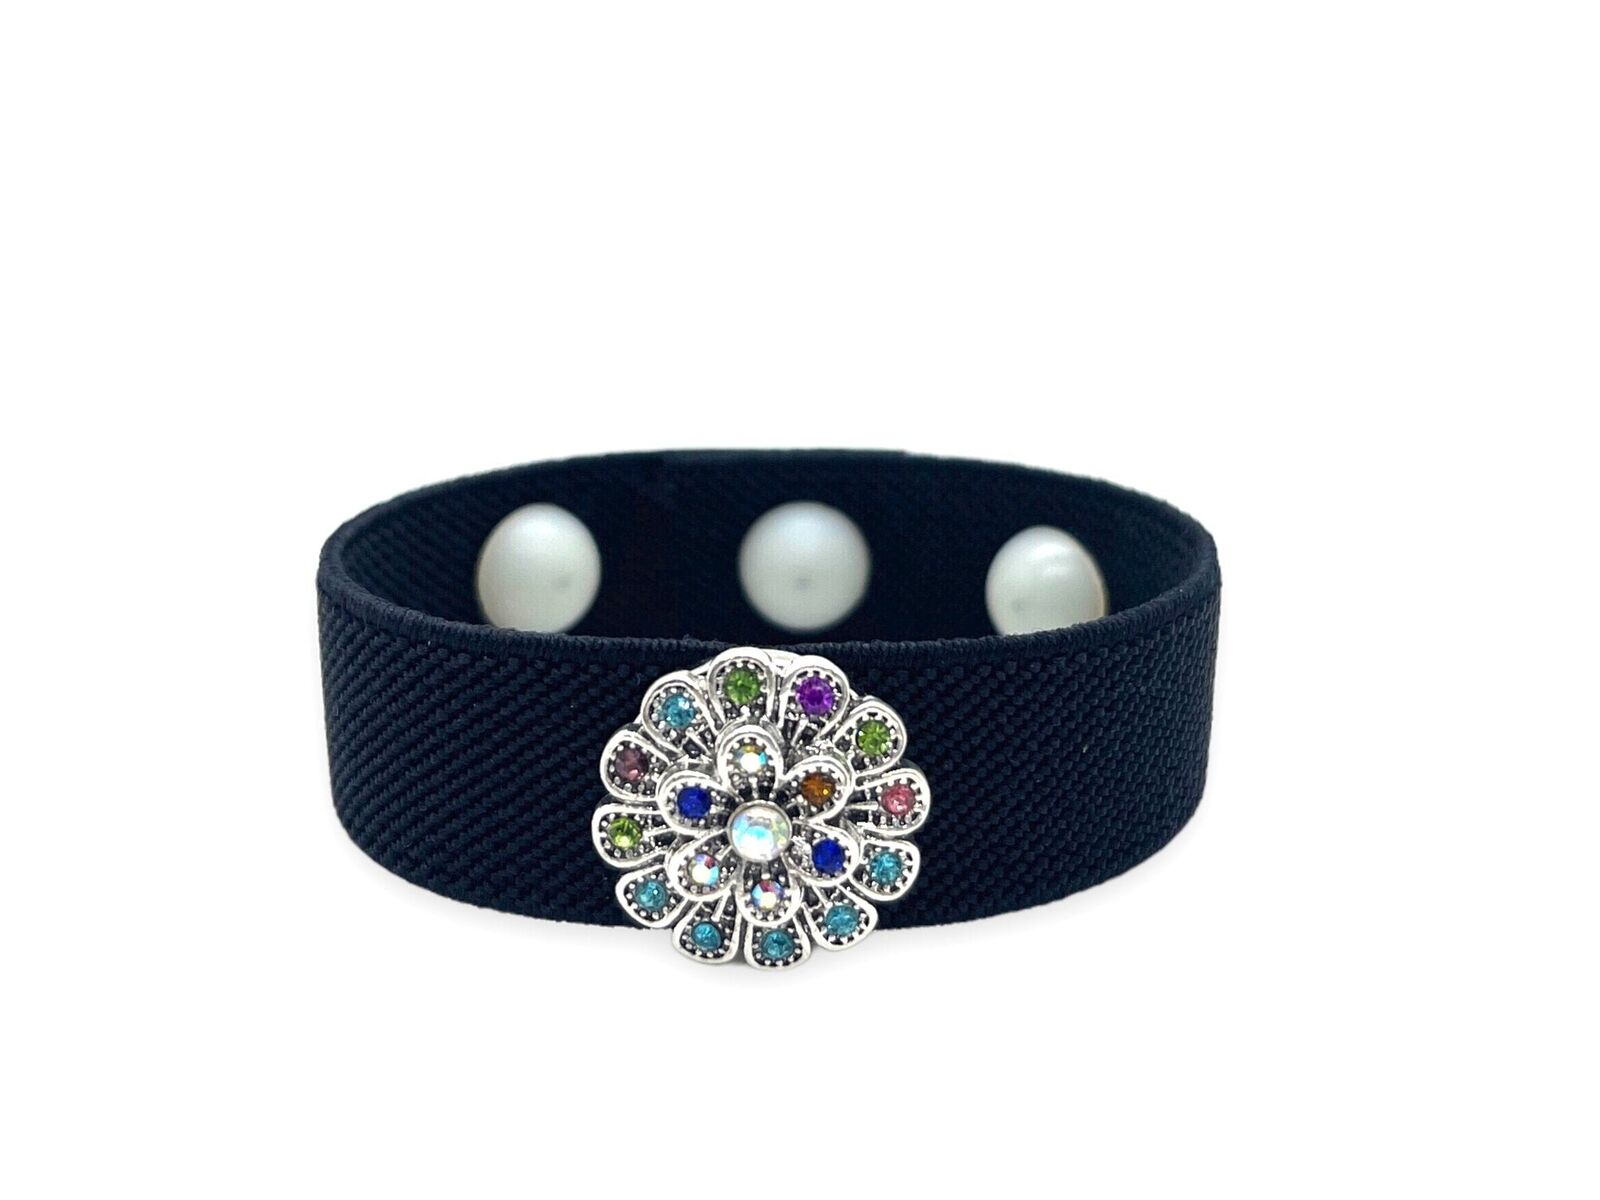 Buy Nausea Relief Acupressure Bracelets Motion Sickness Relief for Sea,  Air, Car Great for Balance Issues and Stress-mood Support pair B&W Online  in India - Etsy